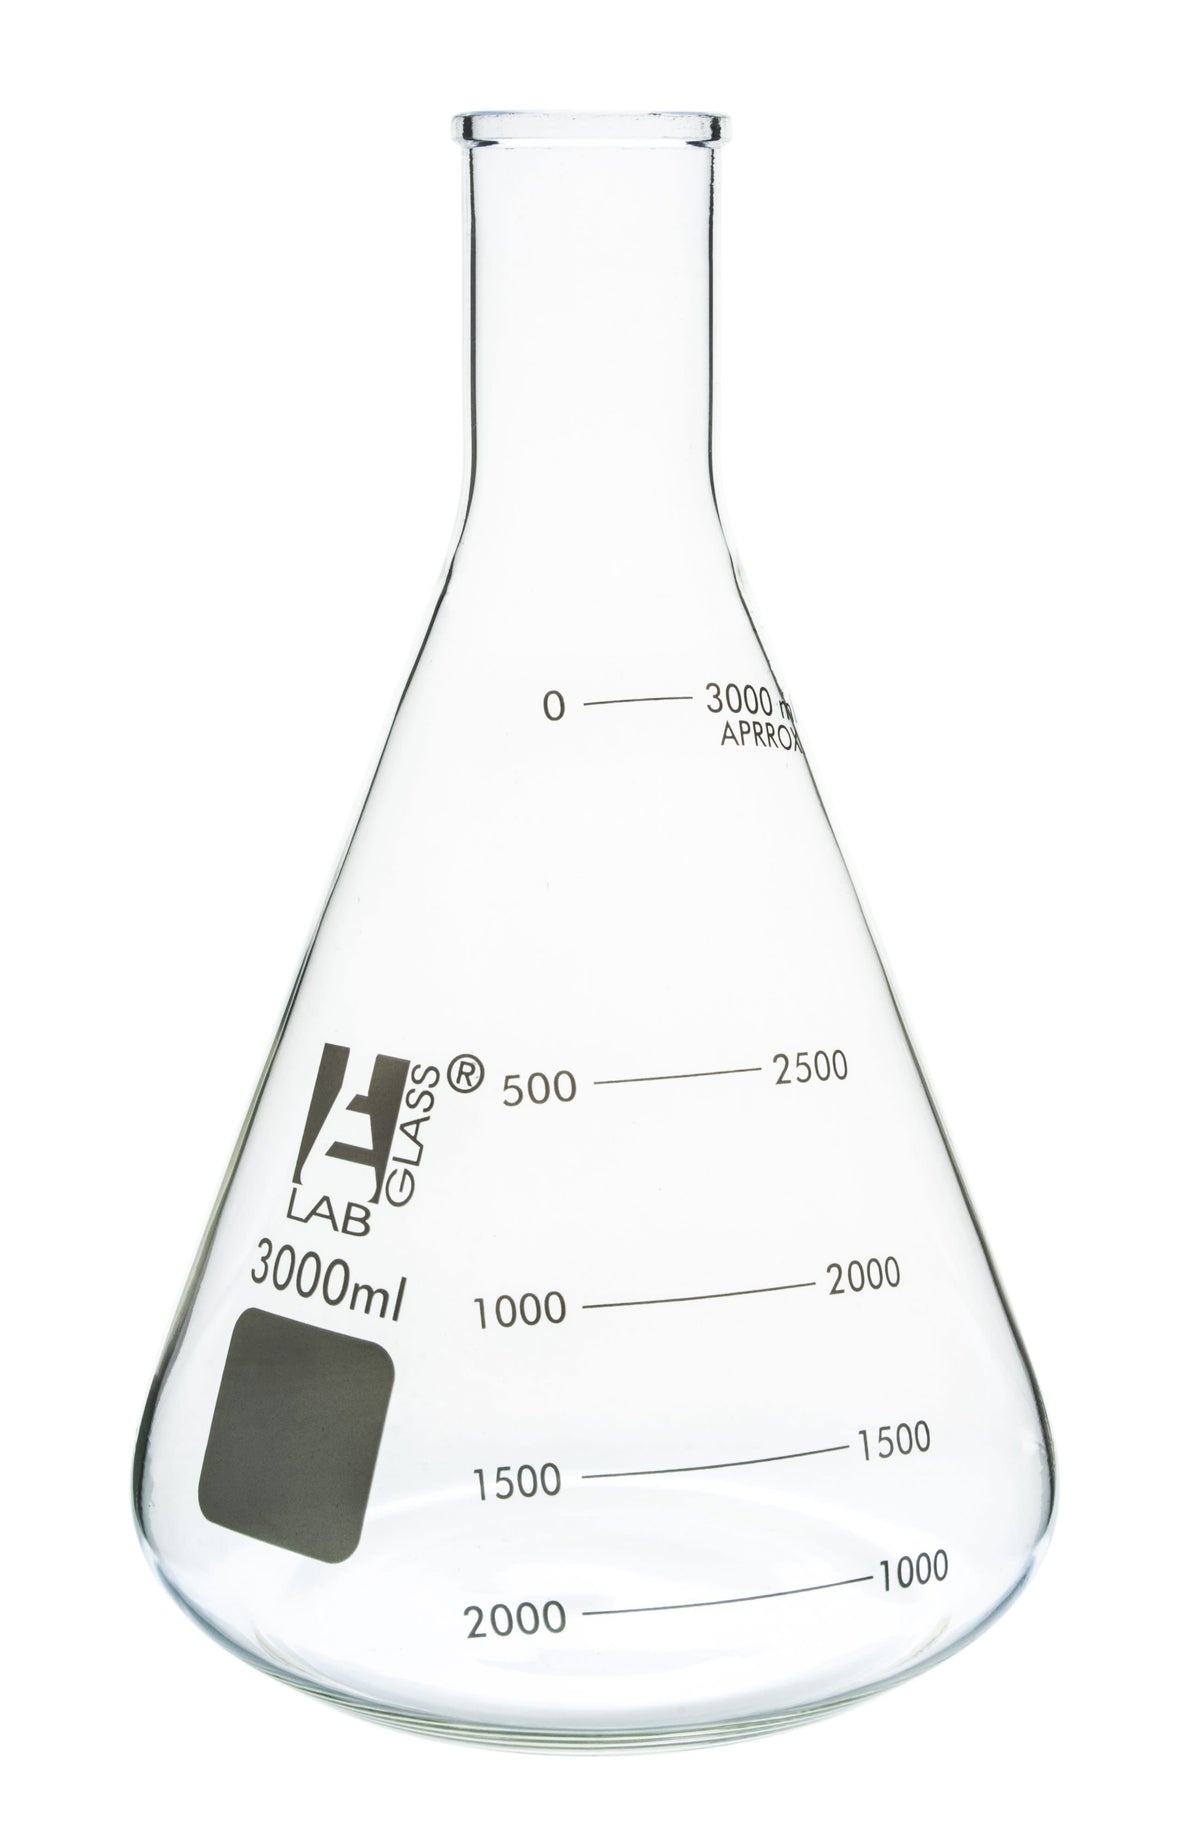 Coloring Page Erlenmeyer flasks - free printable coloring pages - Img 28081